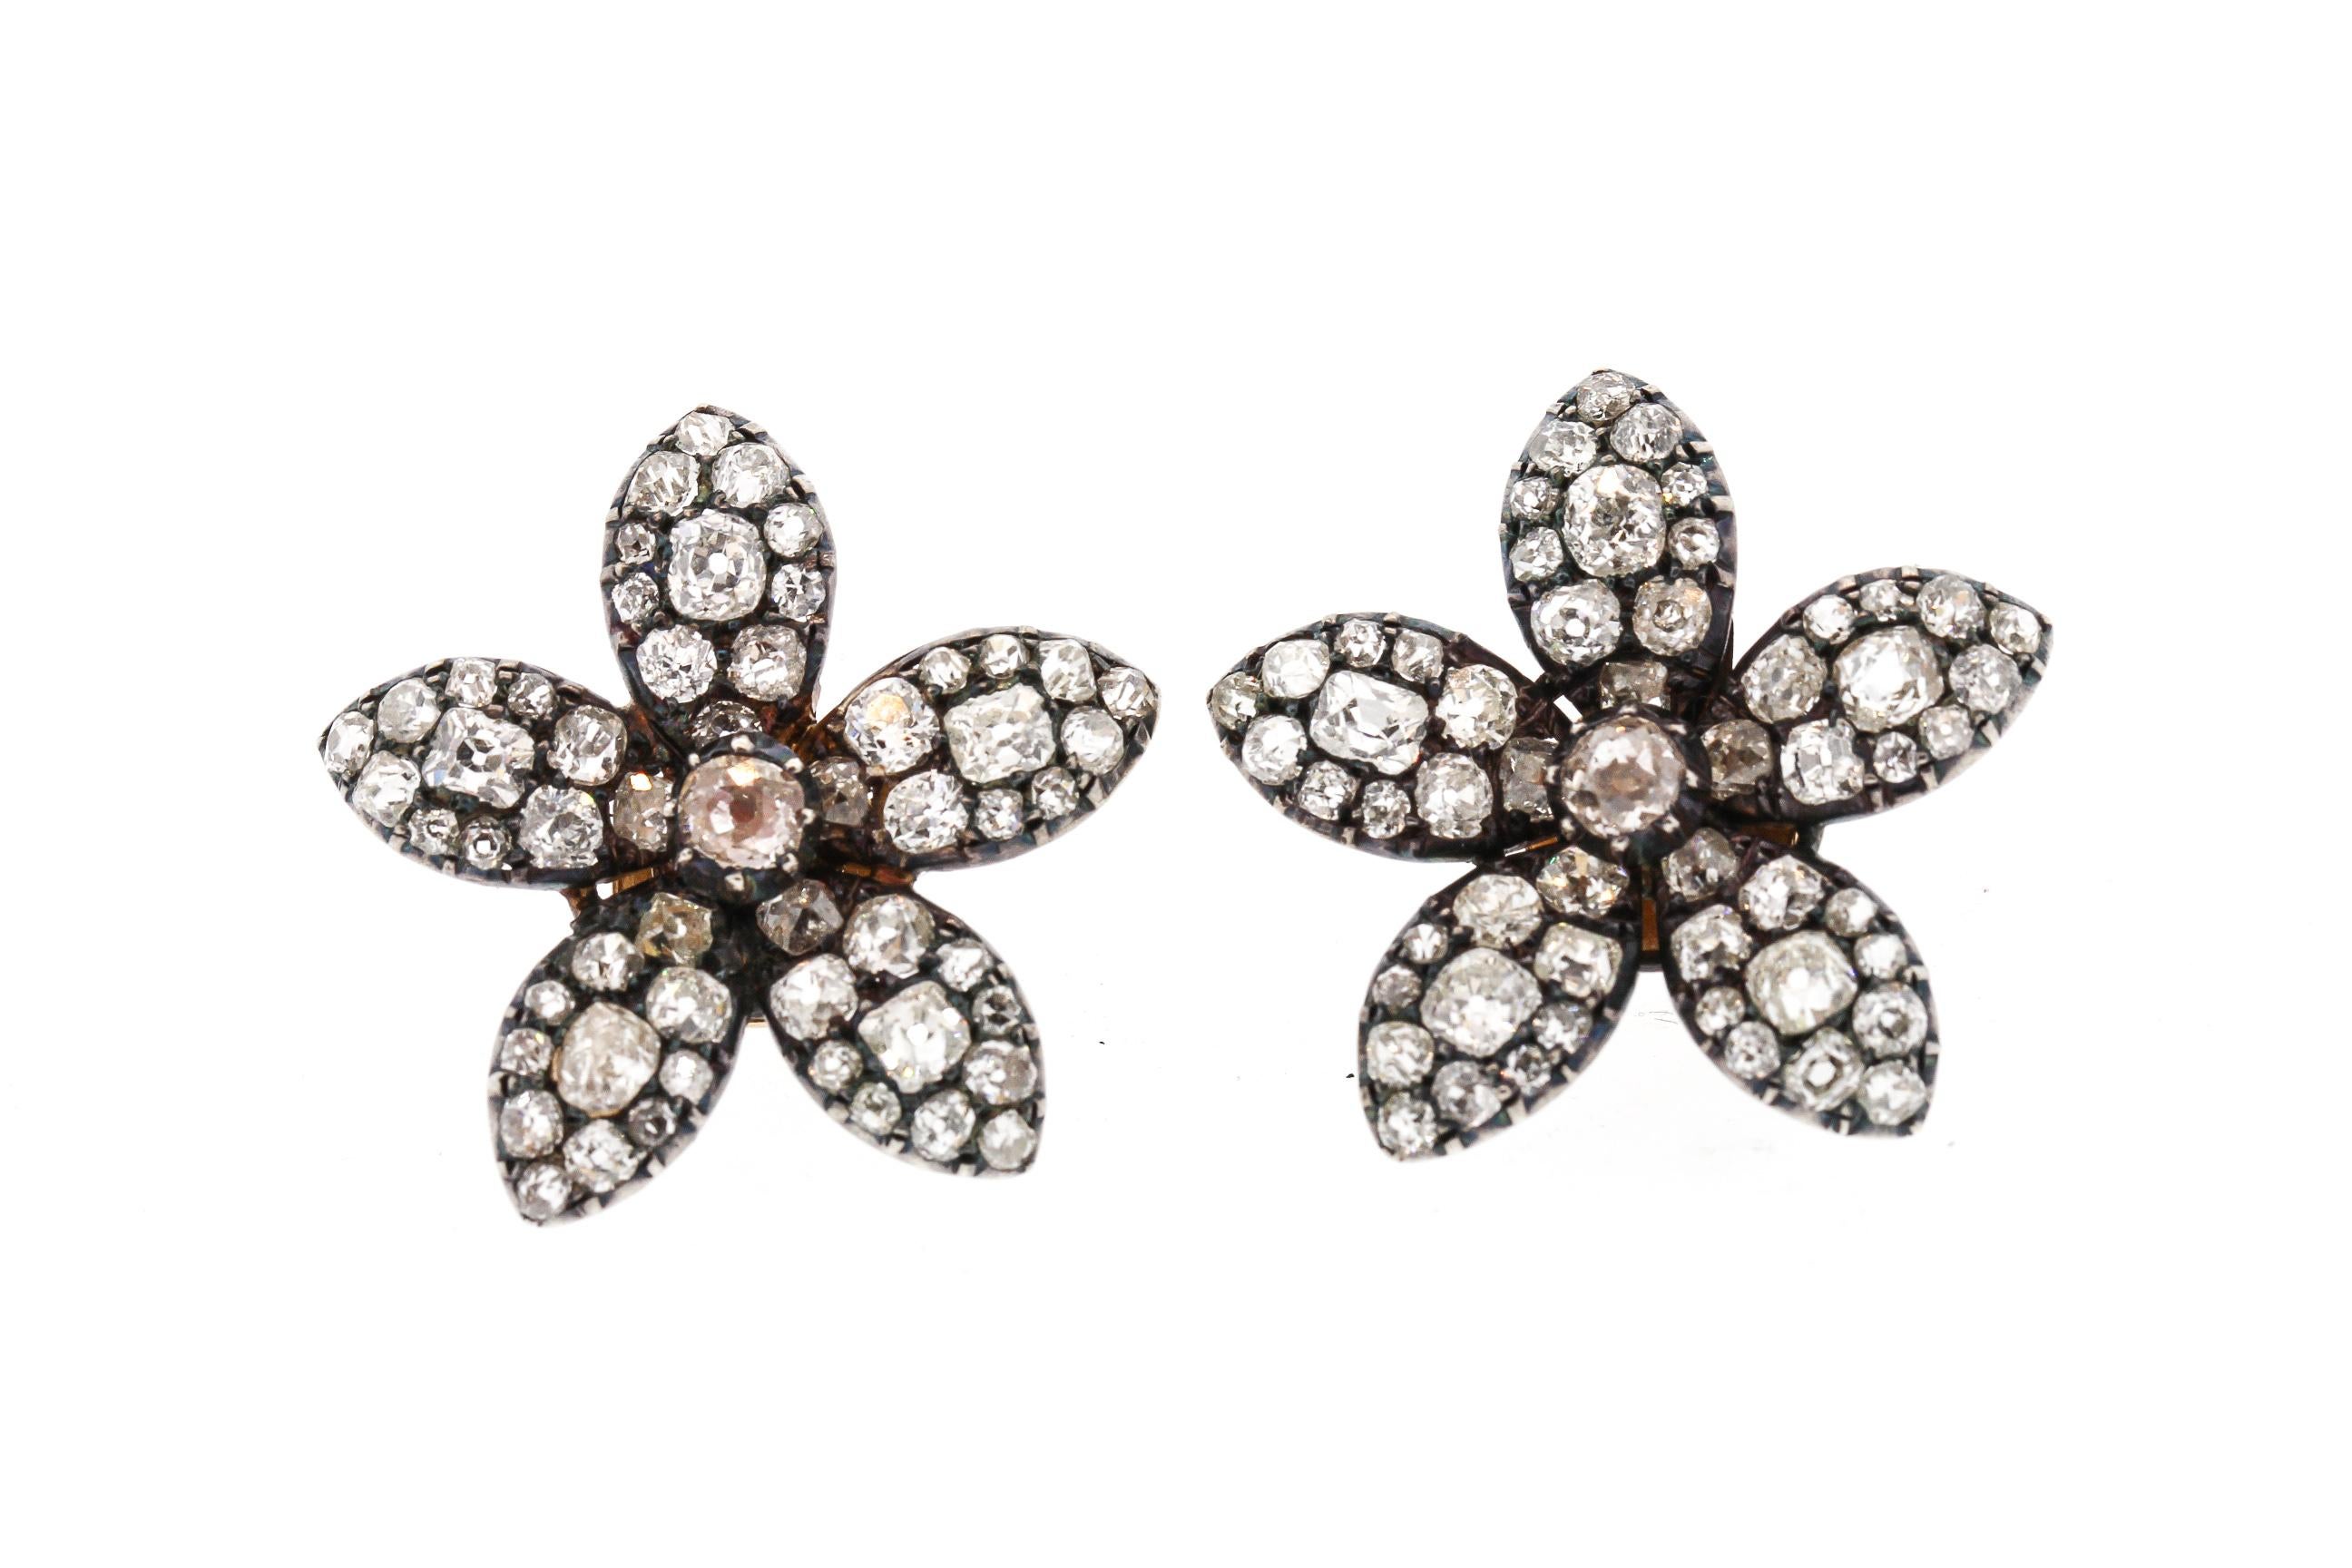 Beautiful Nineteenth Century silver topped gold diamond flower earrings circa 1860. The five petal cluster style earring is attractive and makes a statement. The earrings were likely made from two antique parts that were originally part of a brooch.